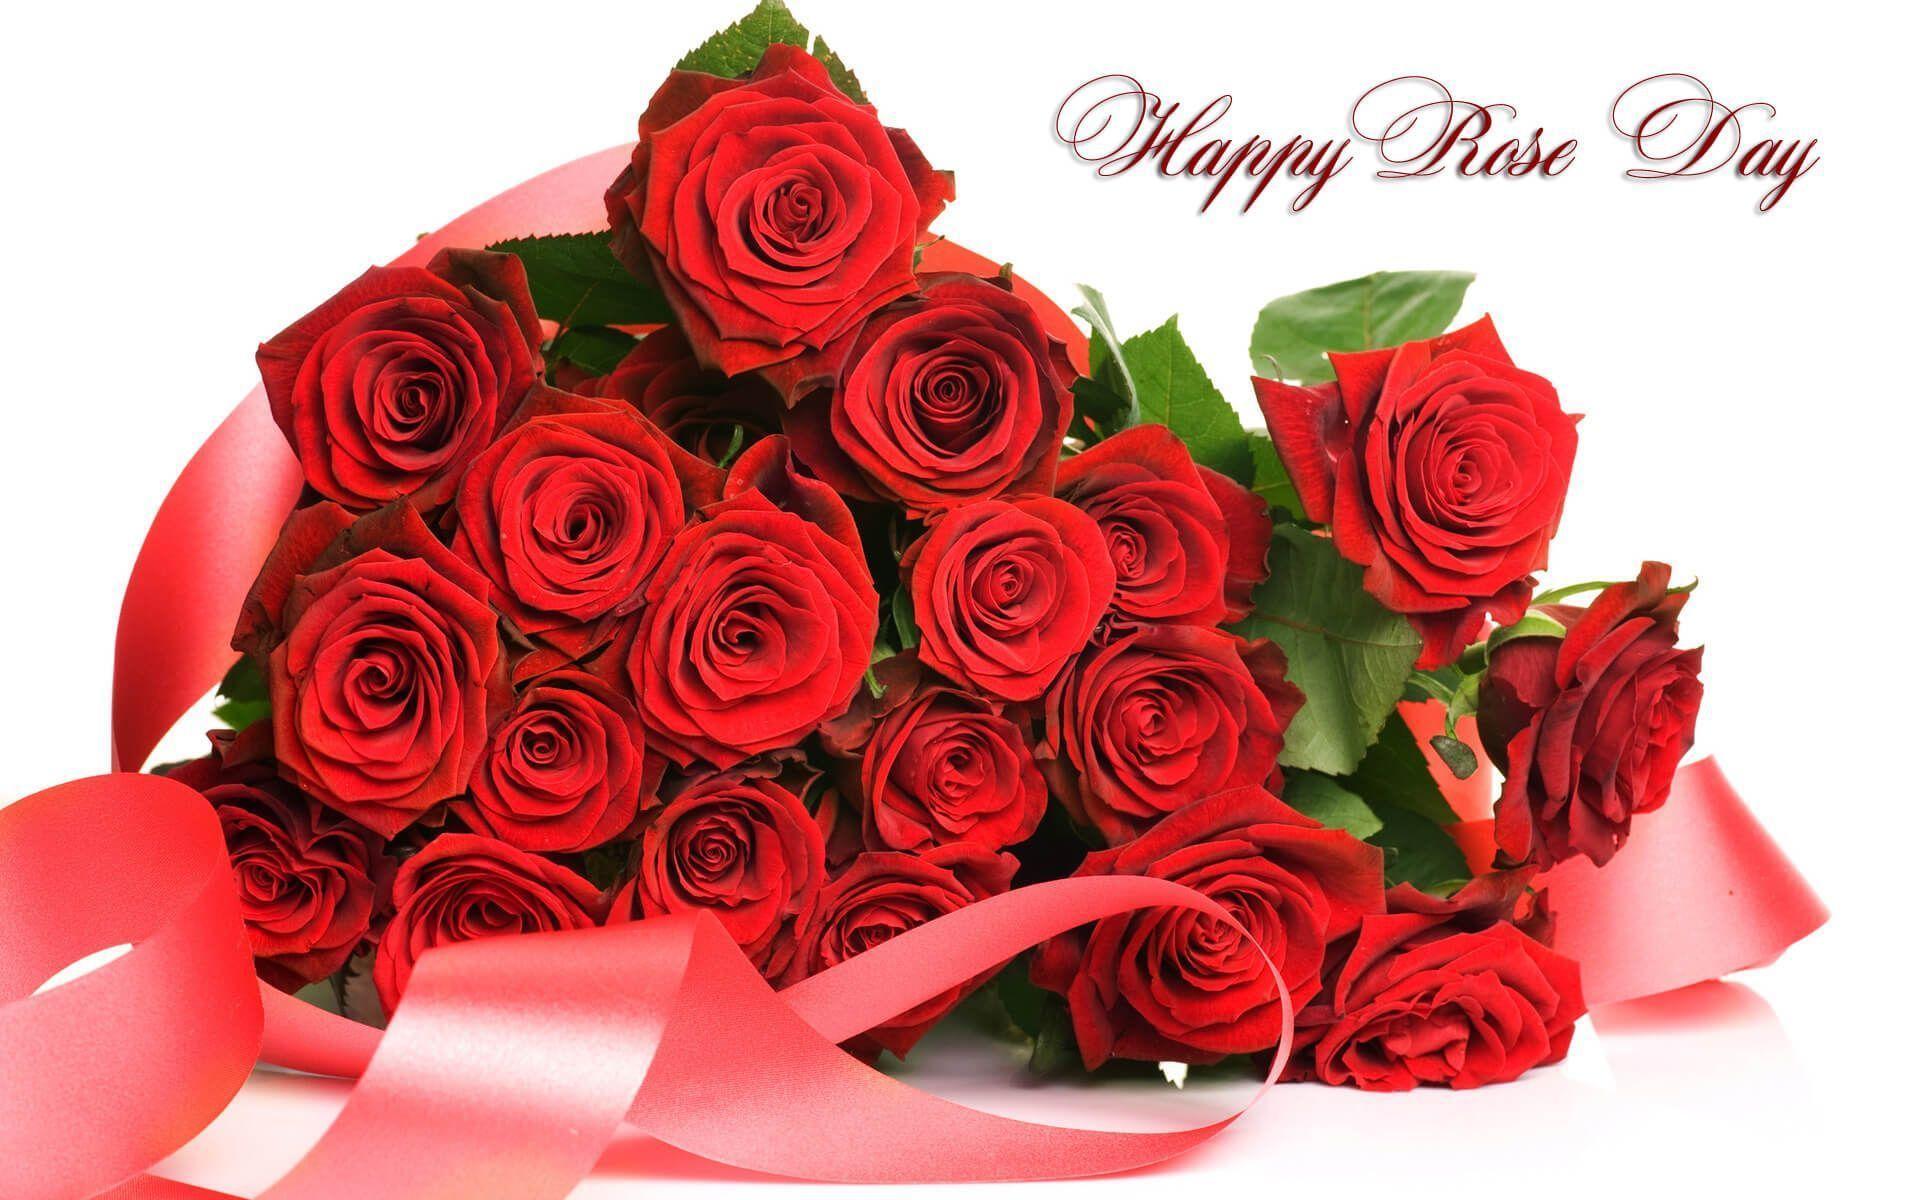 Rose Day Image 2017. Happy Rose Day Quotes, Wishes, SMS